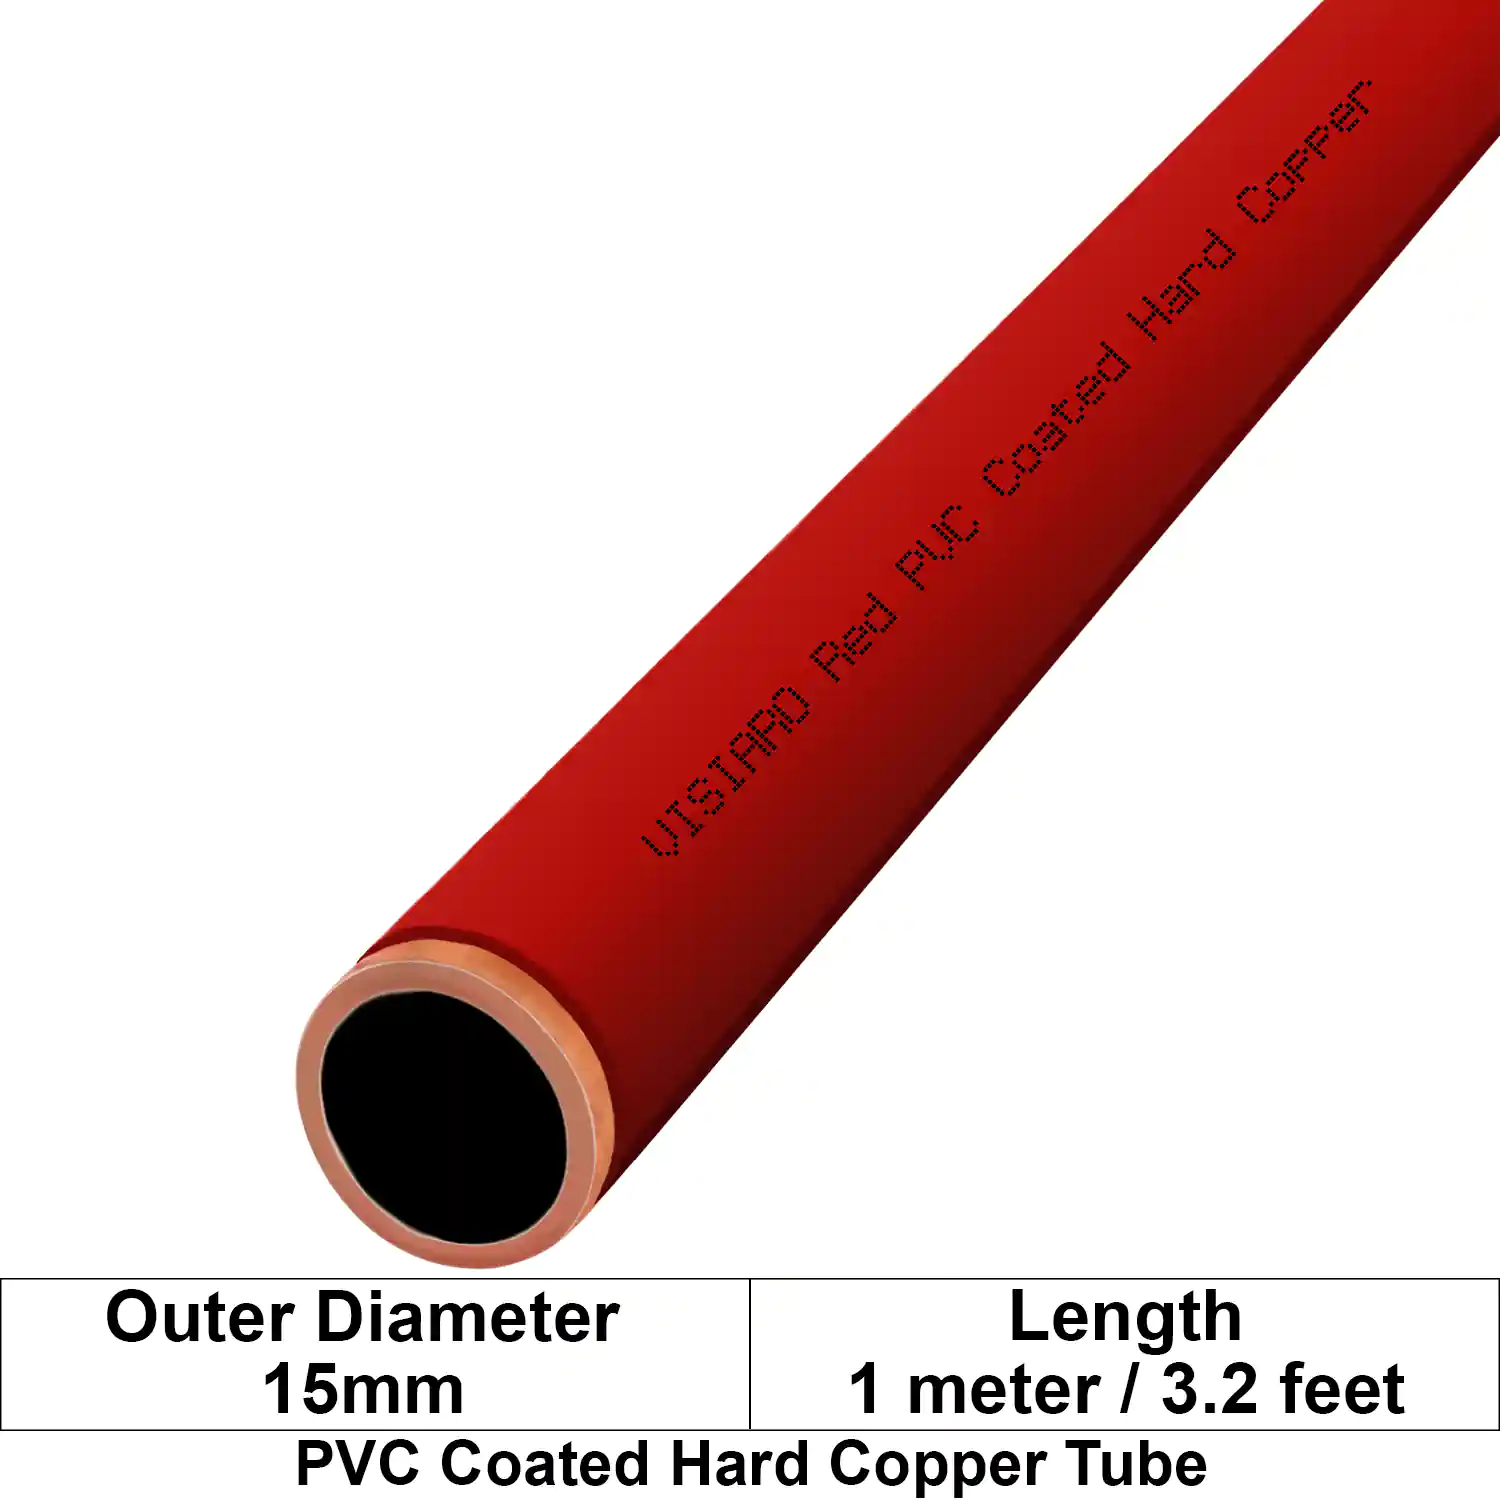 Visiaro Red PVC Coated Hard Copper Tube 1mtr long Outer Diameter - 15 mm